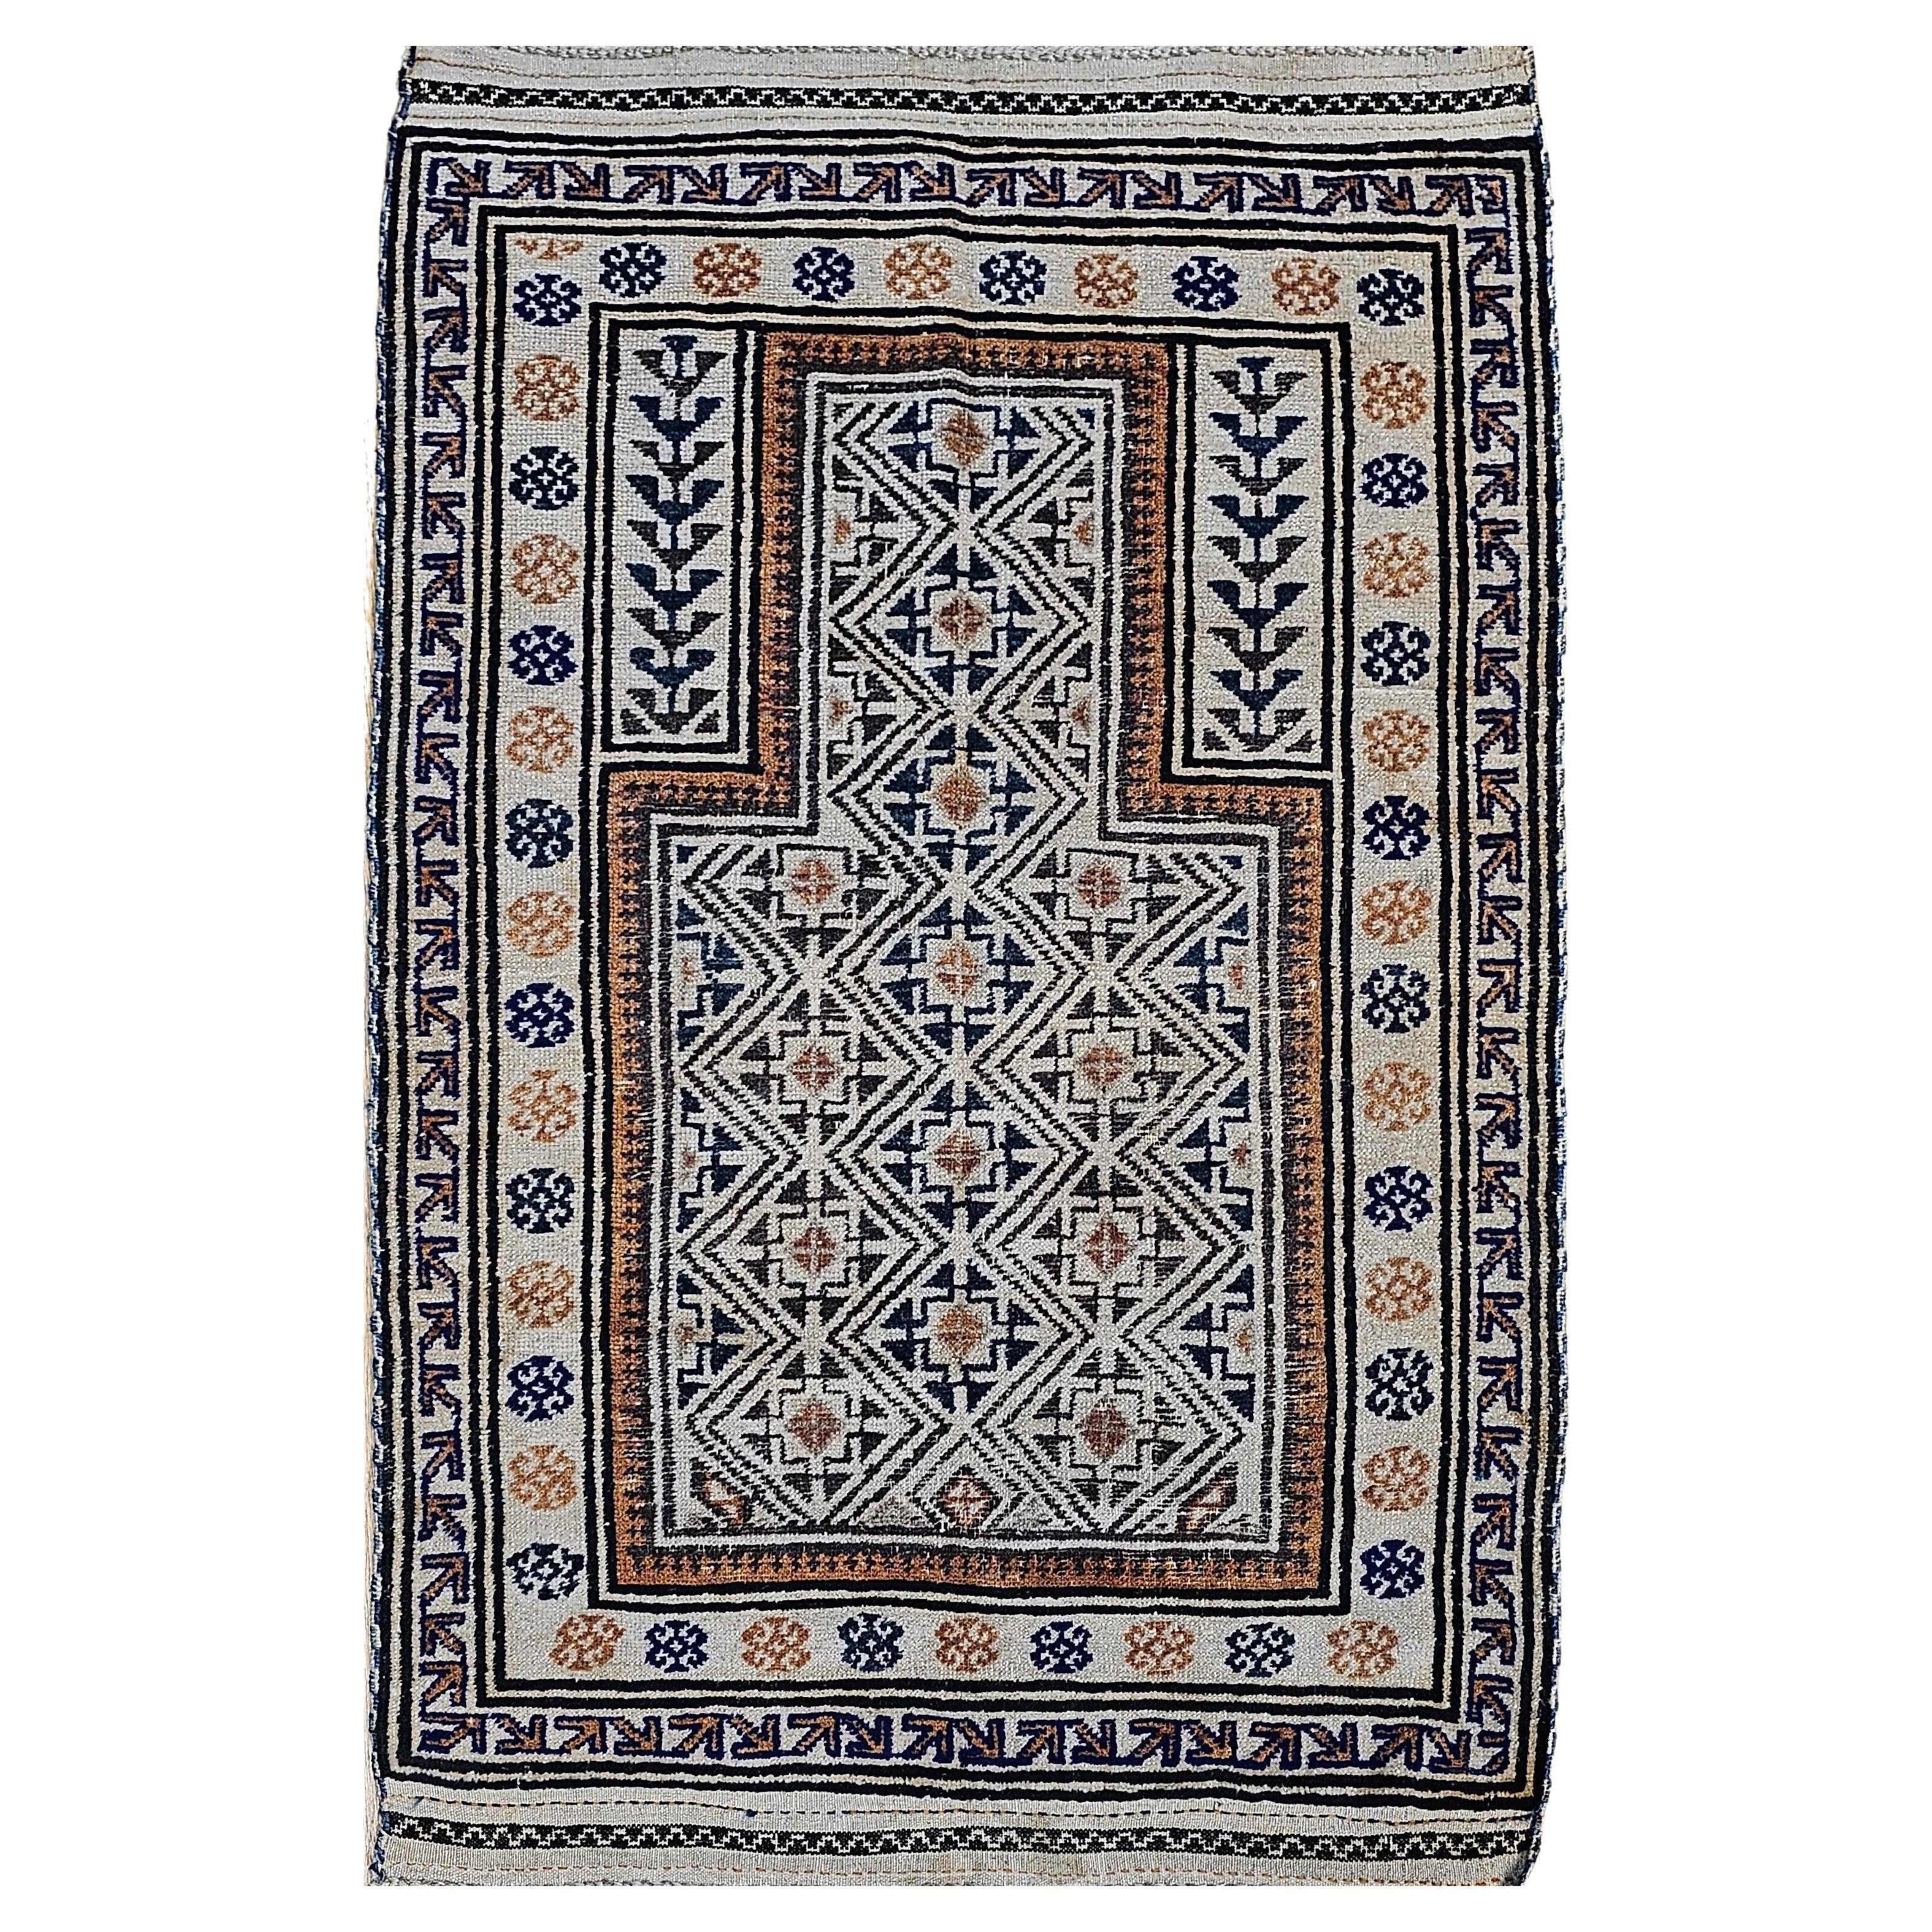 Early 20th Century Persian Baluch Prayer Rug Pattern in Ivory, Brown, Navy Blue For Sale